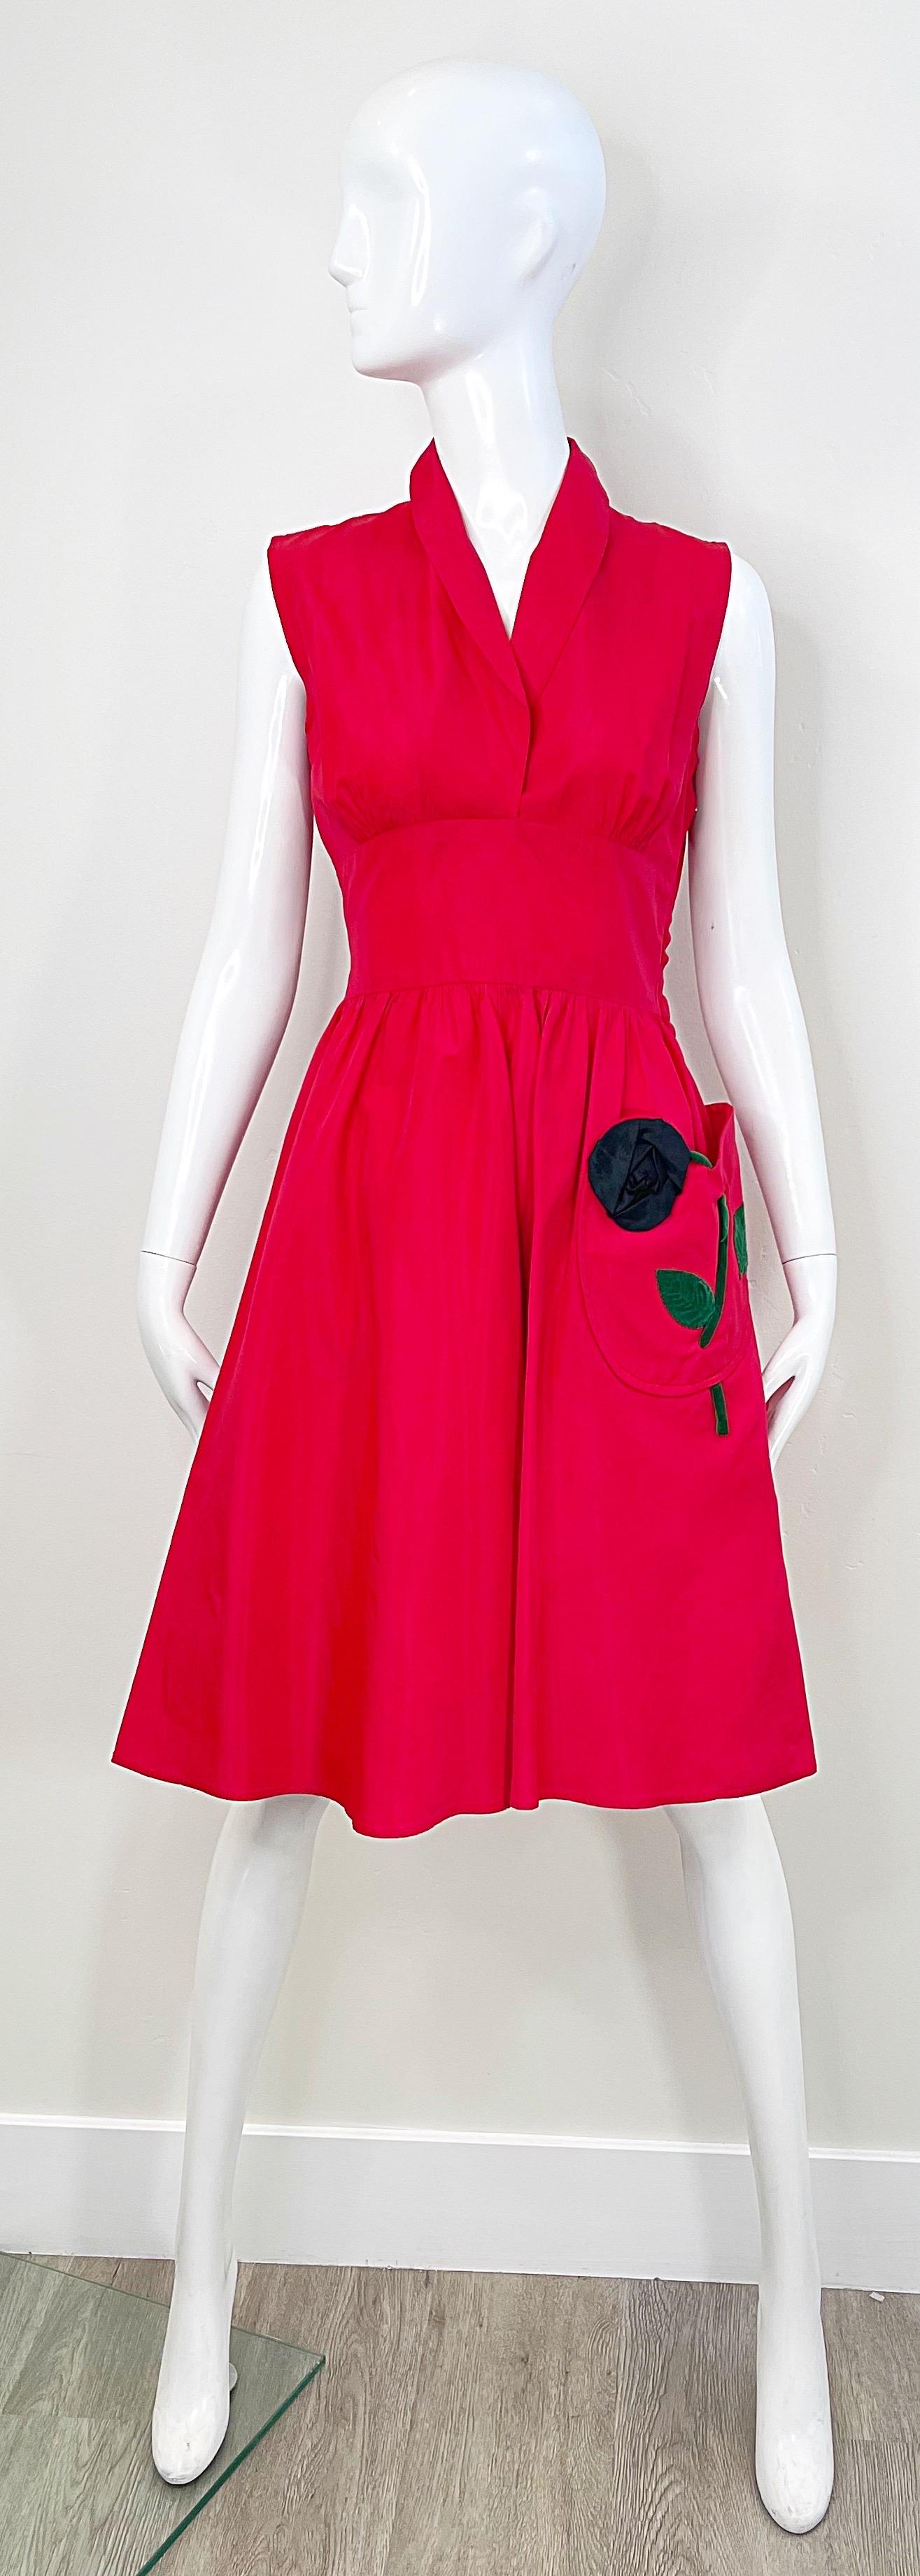 Beautiful and rare vintage 1950s lipstick red silk and nylon taffeta fit and flare dress !  Tailored bodice with a full skirt that features a black taffeta rose with green velvet stem on the pocket. Hidden metal zipper up the side. 
Very well ell